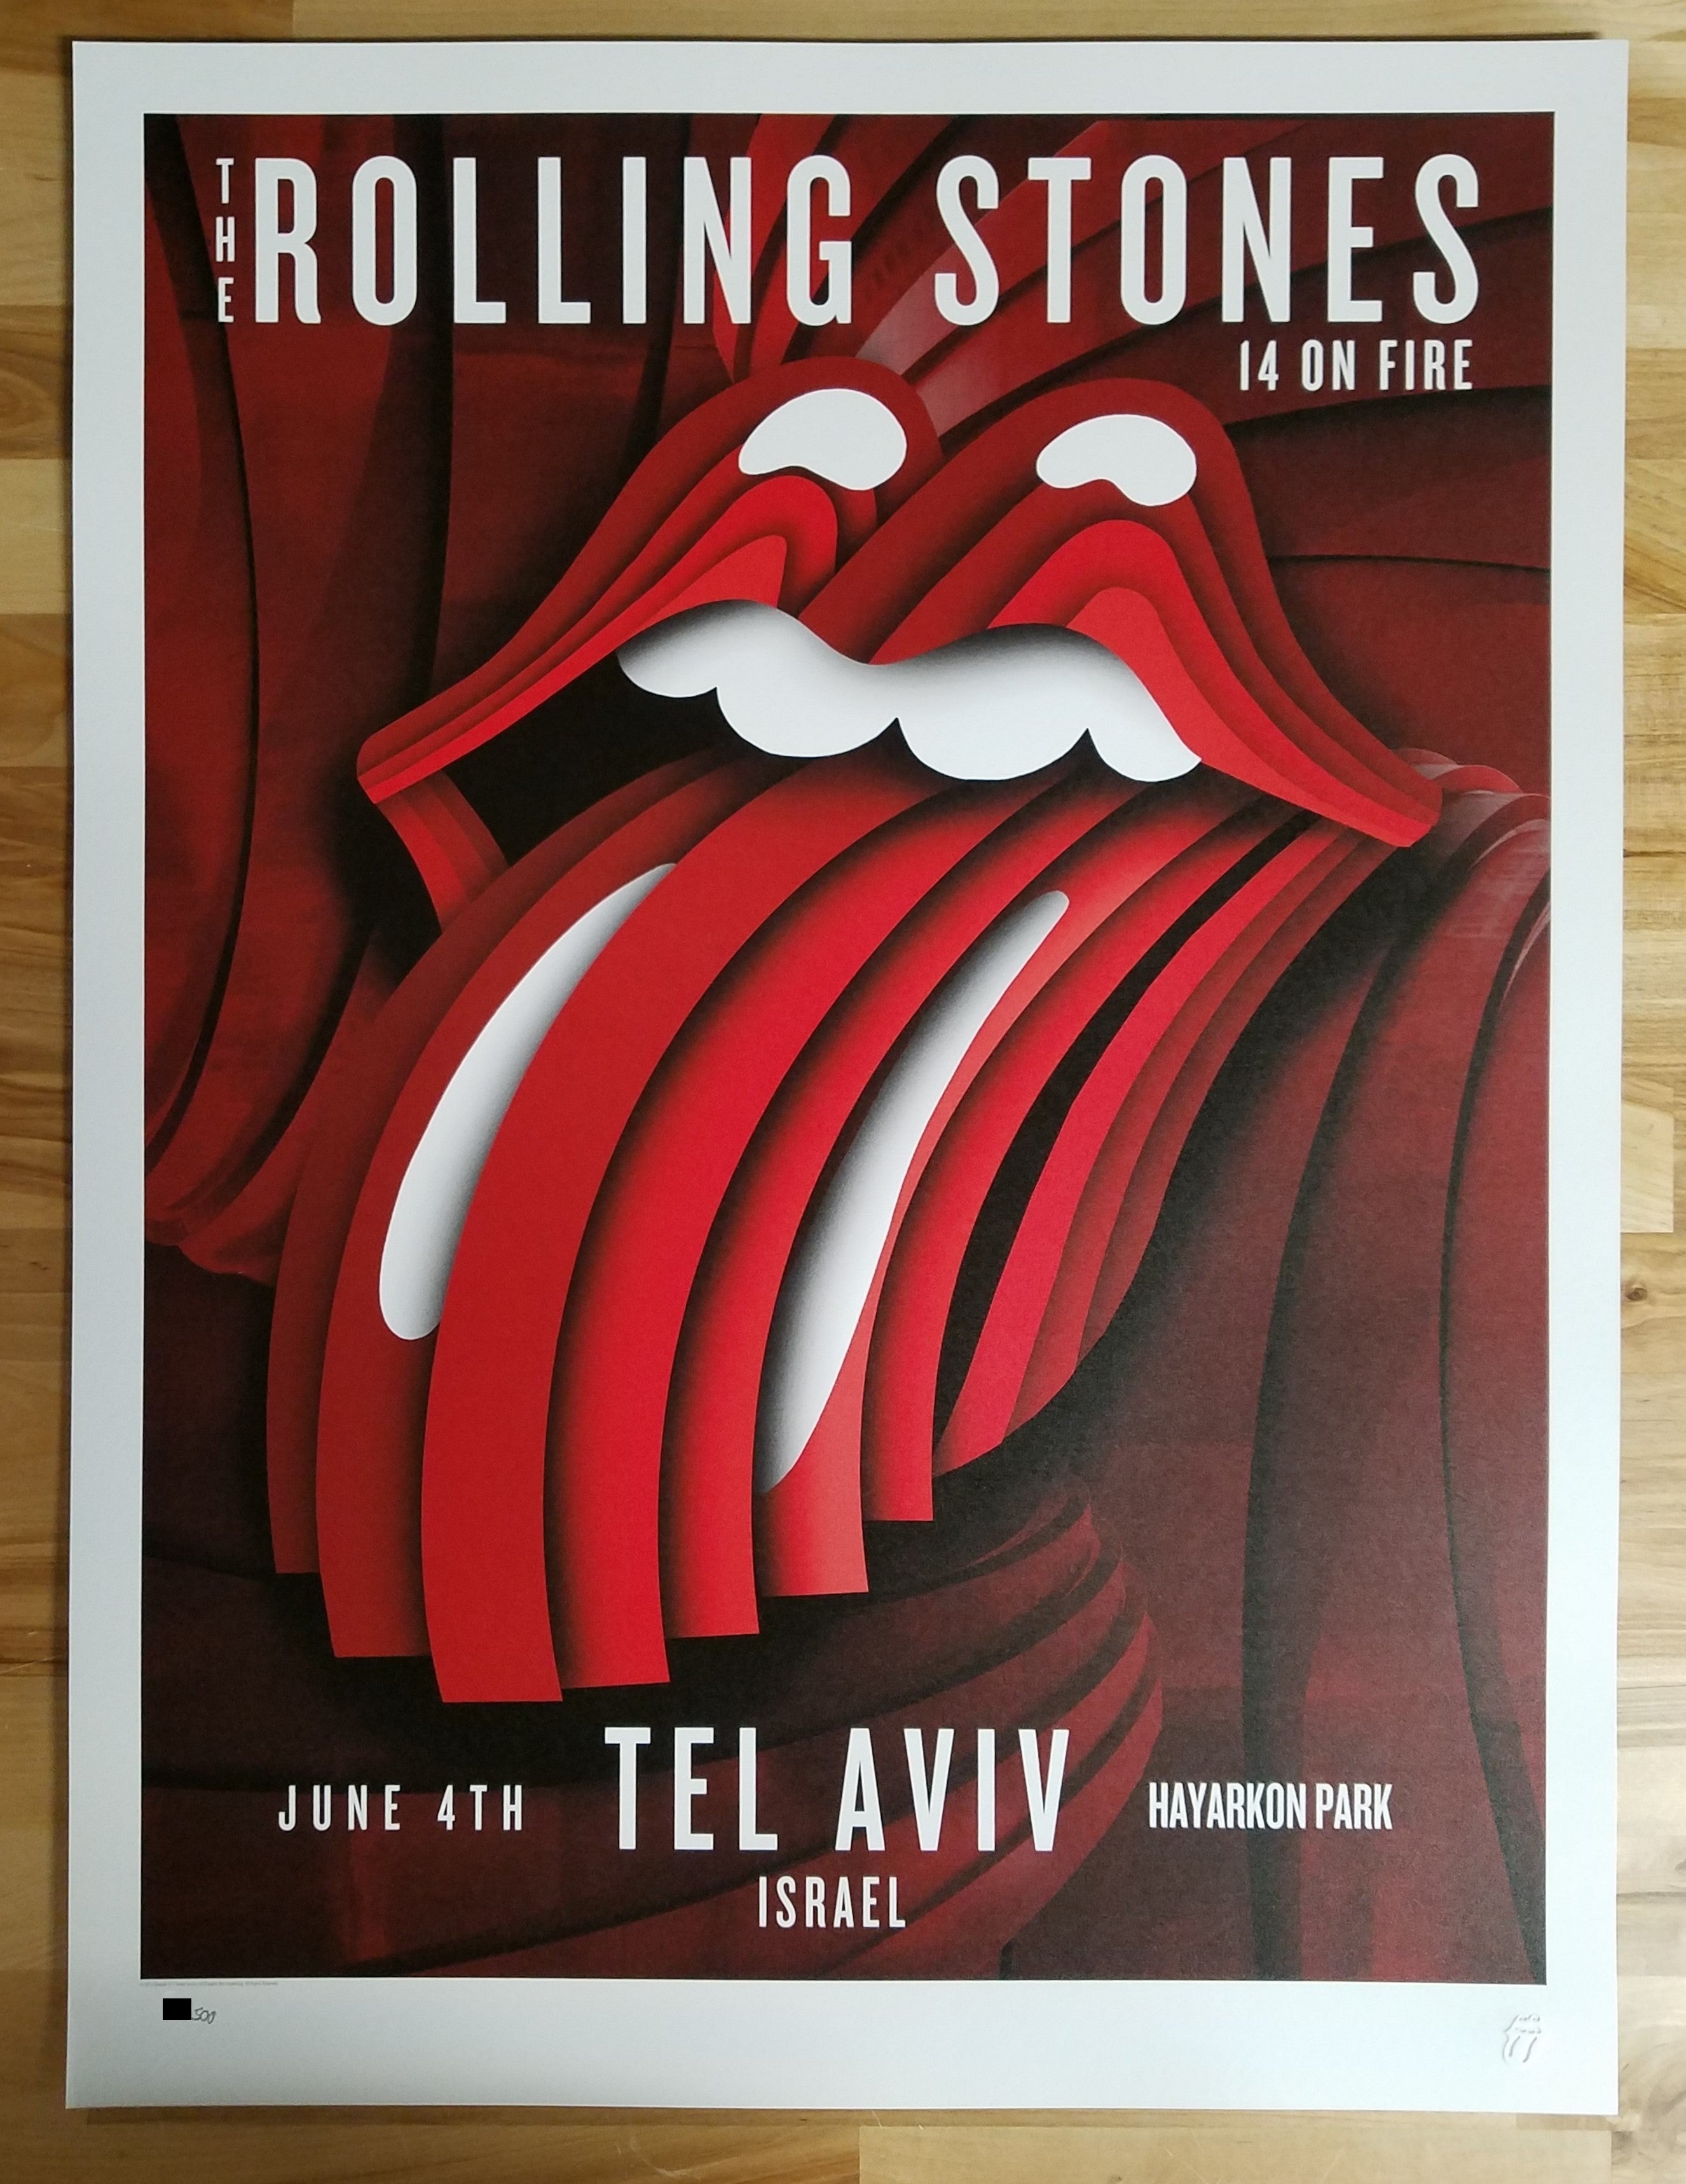 Title: Rolling Stones - 2014 OFFICIAL POSTER TEL AVIV, ISRAEL  Poster artist:   Edition:  xx/500  Type: Limited edition lithograph   Size: 17" x 23"  Location: Tel Aviv, Israel   Venue: Hayarkon Park   Notes:  1st edition, official poster hand numbered and embossed.  Official poster, Europe 14 On Fire Tour original from the show!